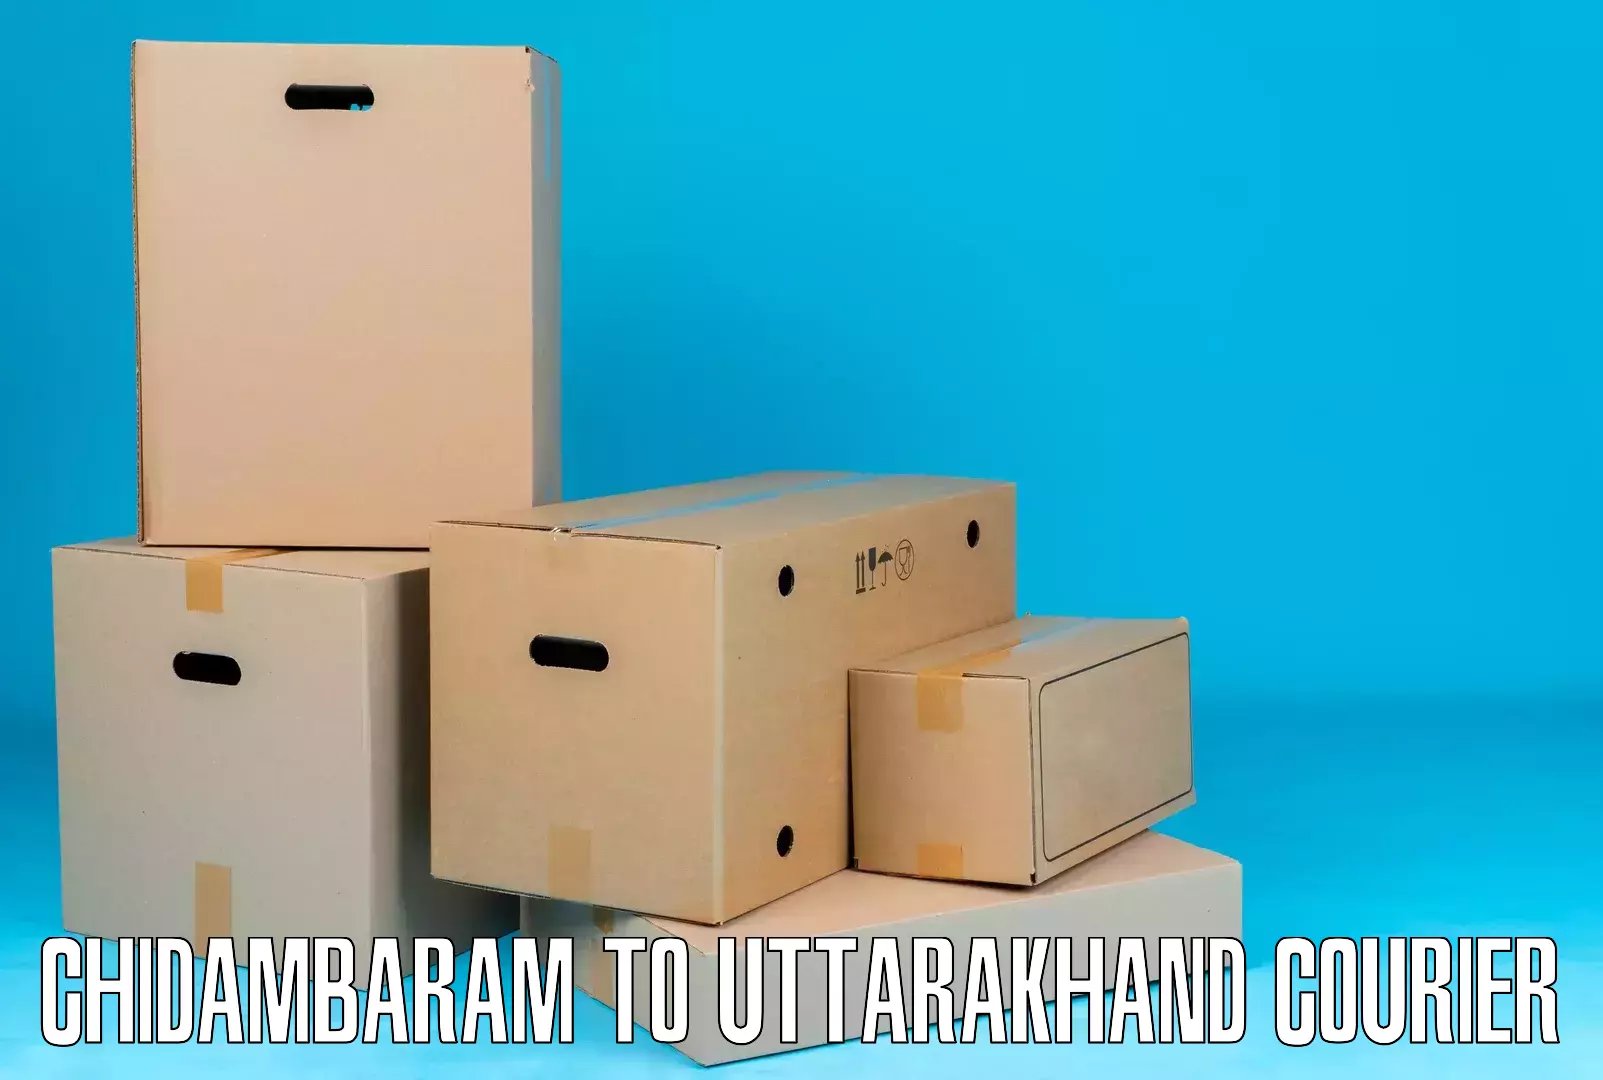 Package delivery network Chidambaram to Pithoragarh